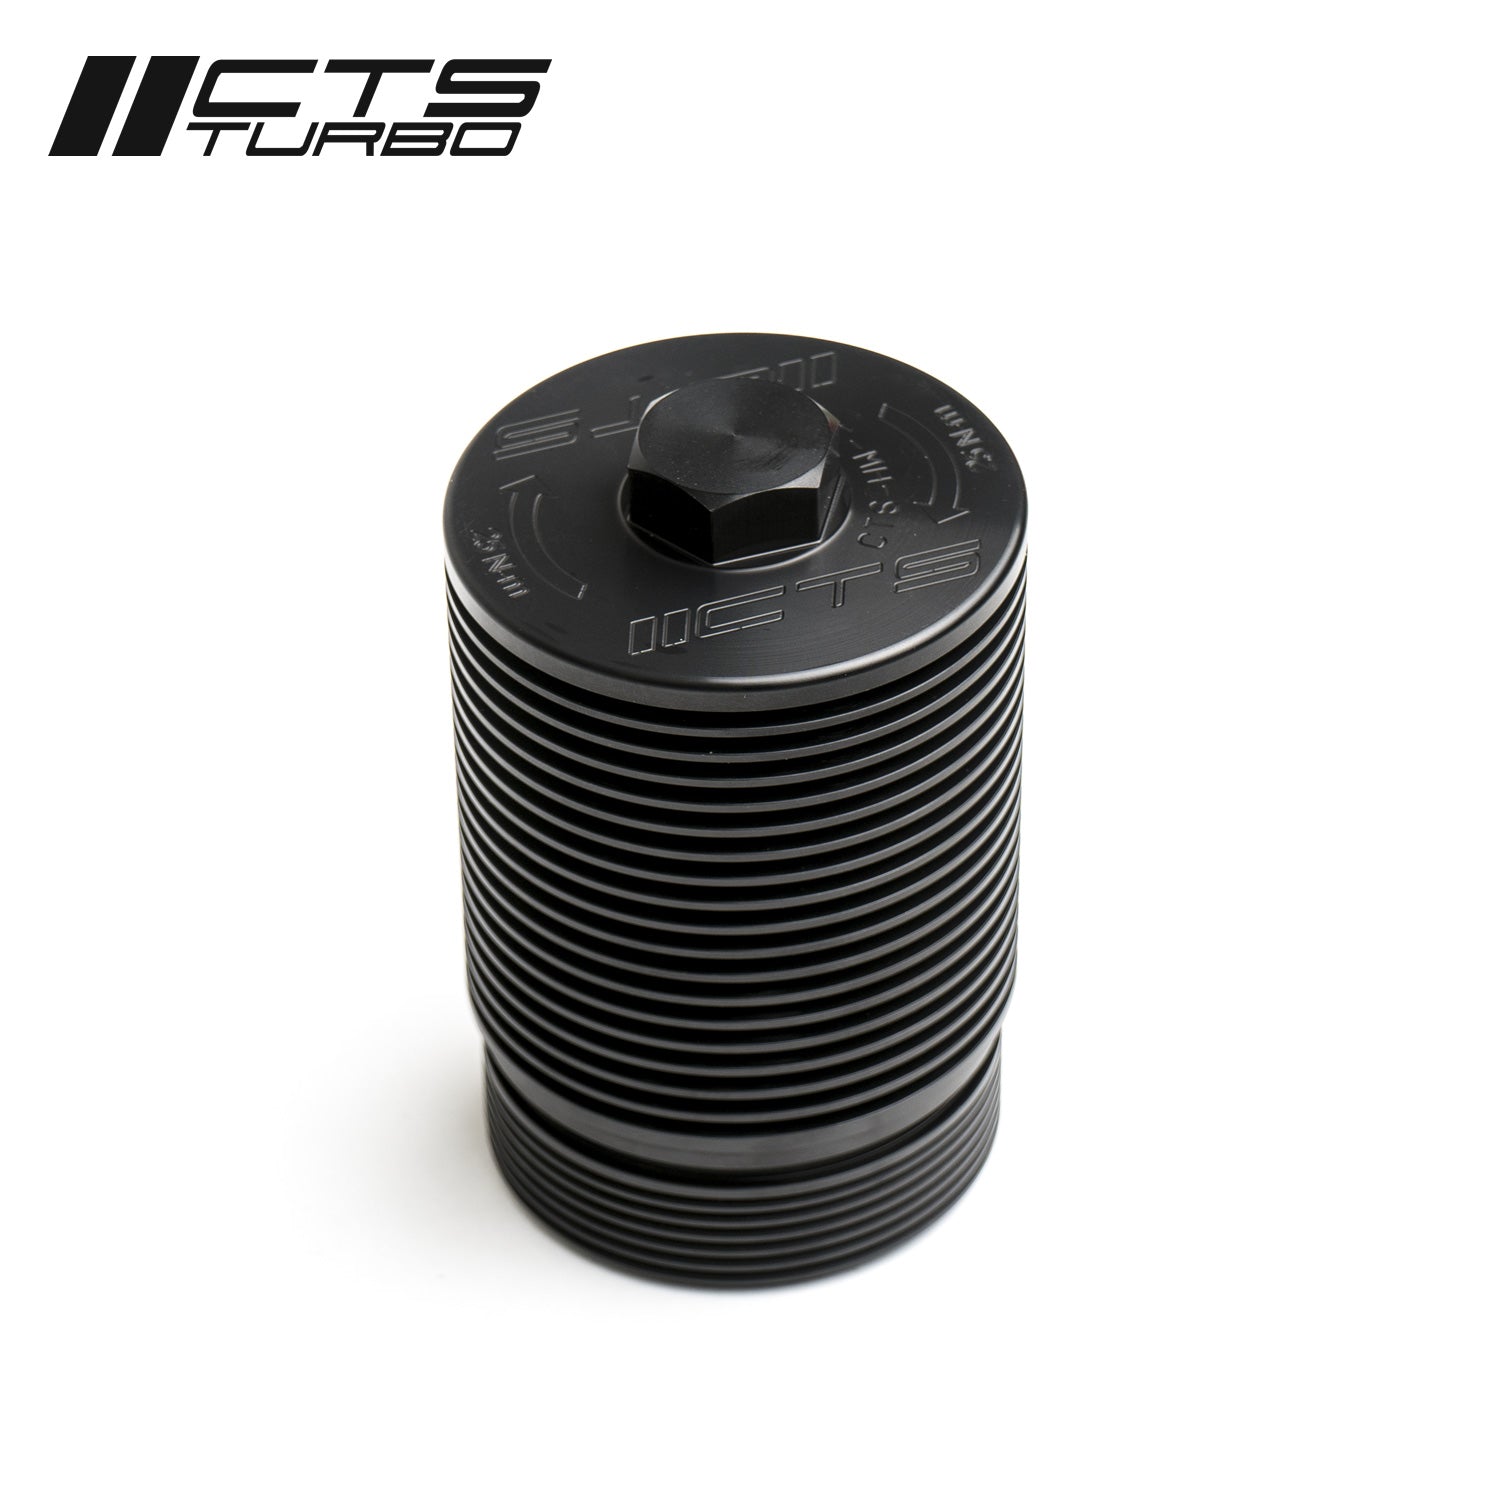 CTS B-COOL DSG OIL FILTER HOUSING S3 (8V)/RS3 (8V), TTRS (8S), GOLF R (MK7.5) WITH 7-SPEED DSG (DQ381 AND DQ500)